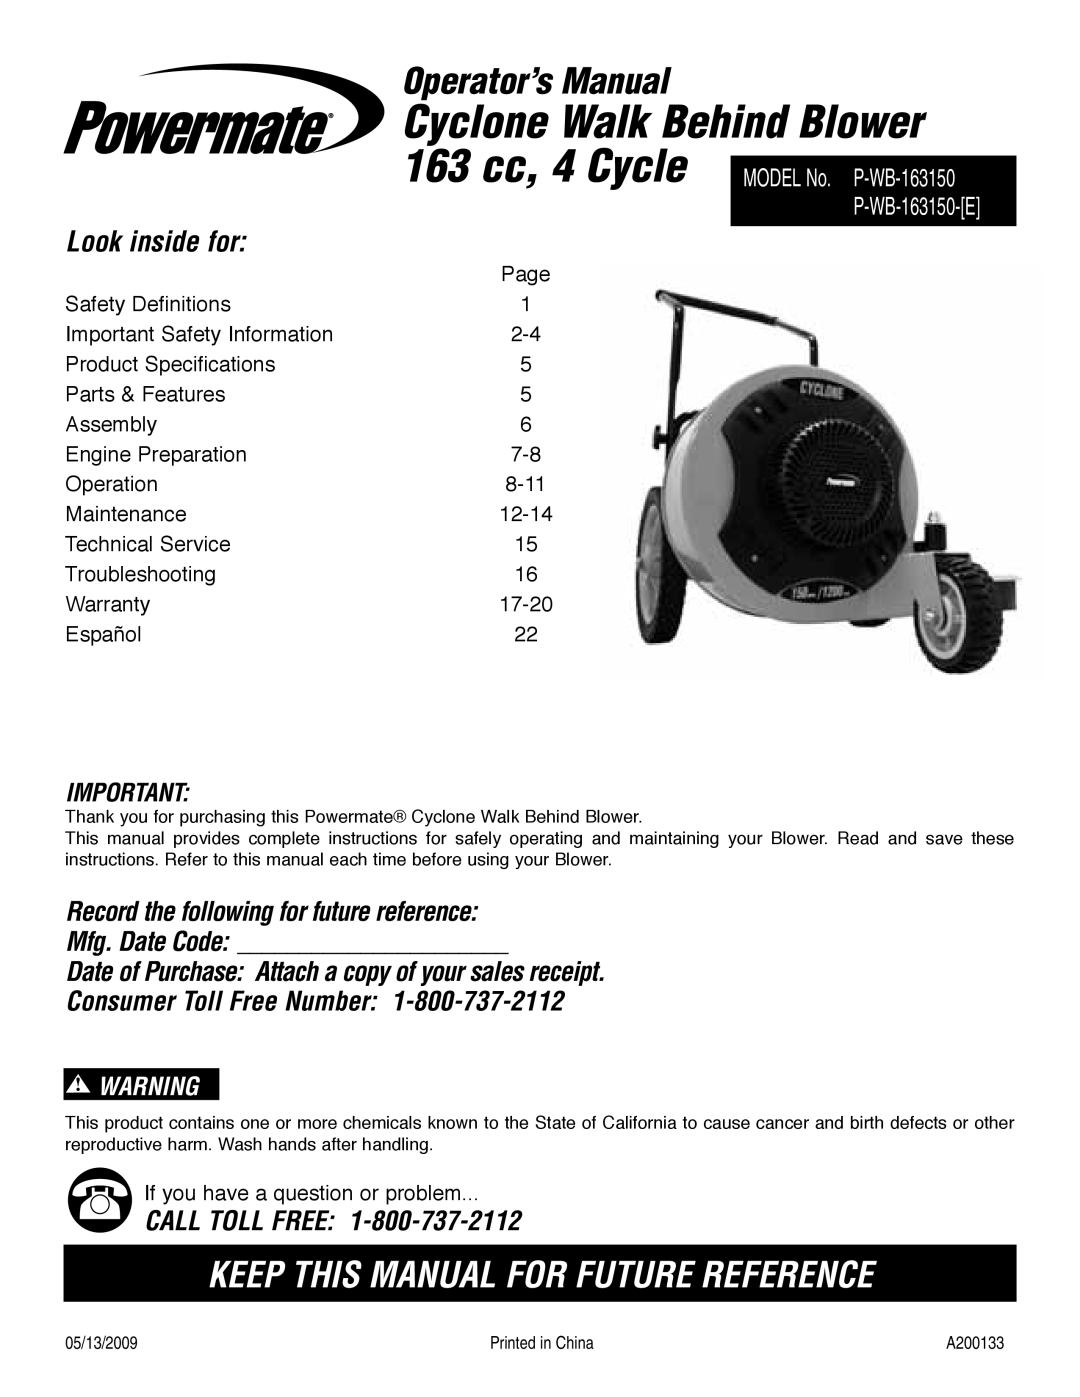 Powermate P-WB-163150 specifications Operator’s Manual, Keep This Manual For Future Reference, Look inside for 